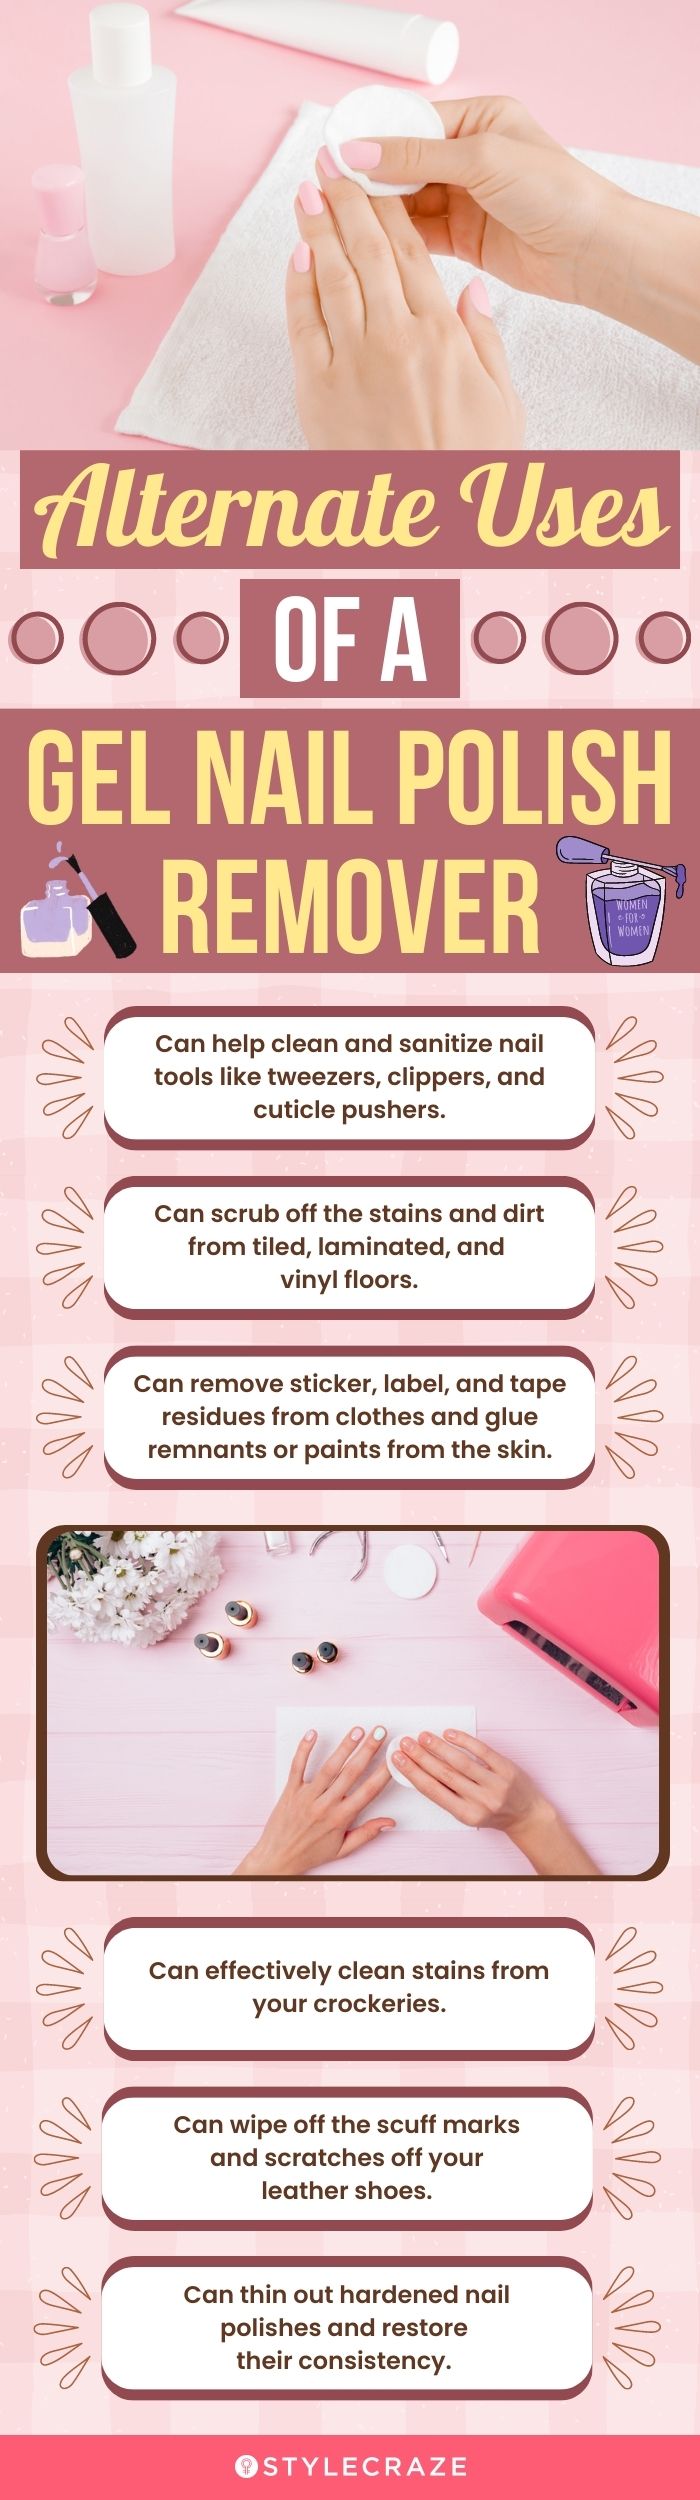 Alternate Uses Of A Gel Nail Polish Remover (infographic)